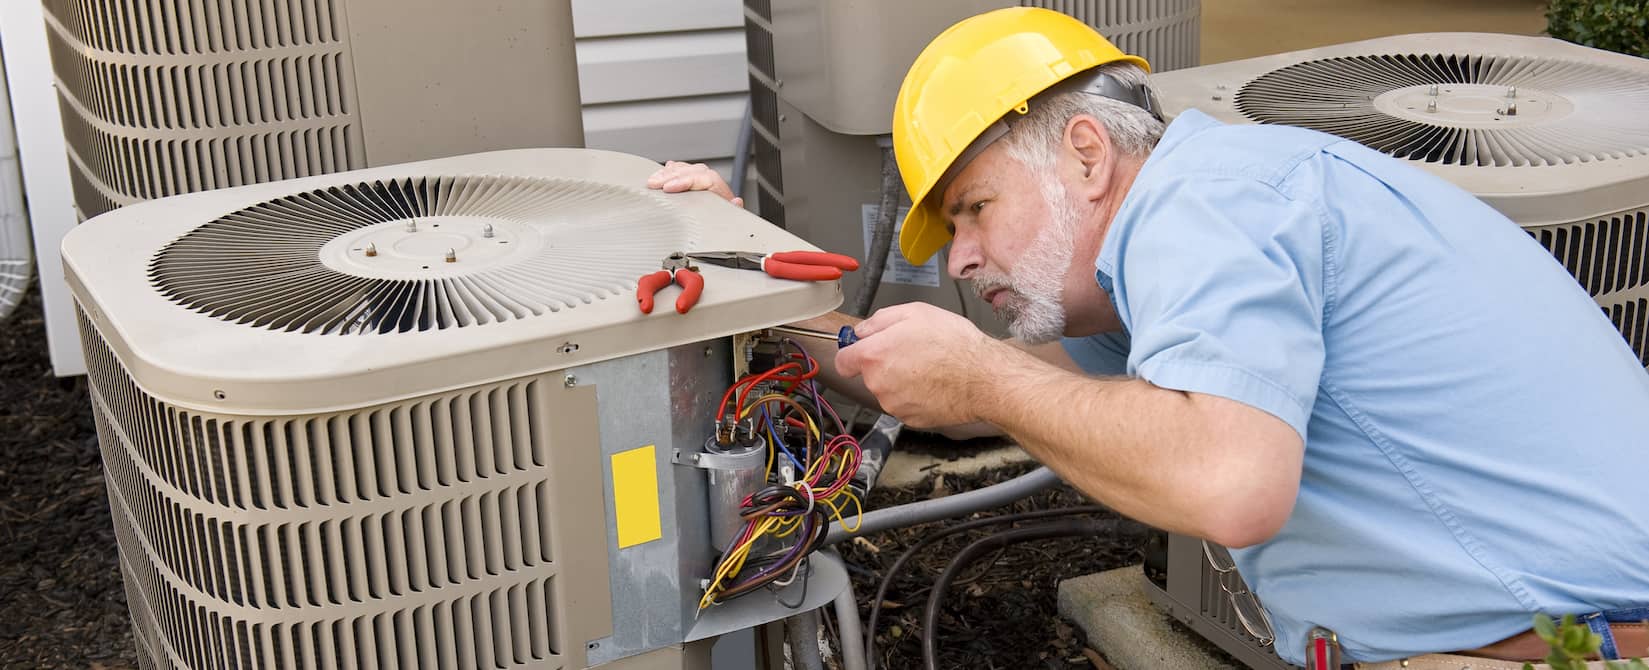 Sanford Air Conditioning Services To Cherish Your Place